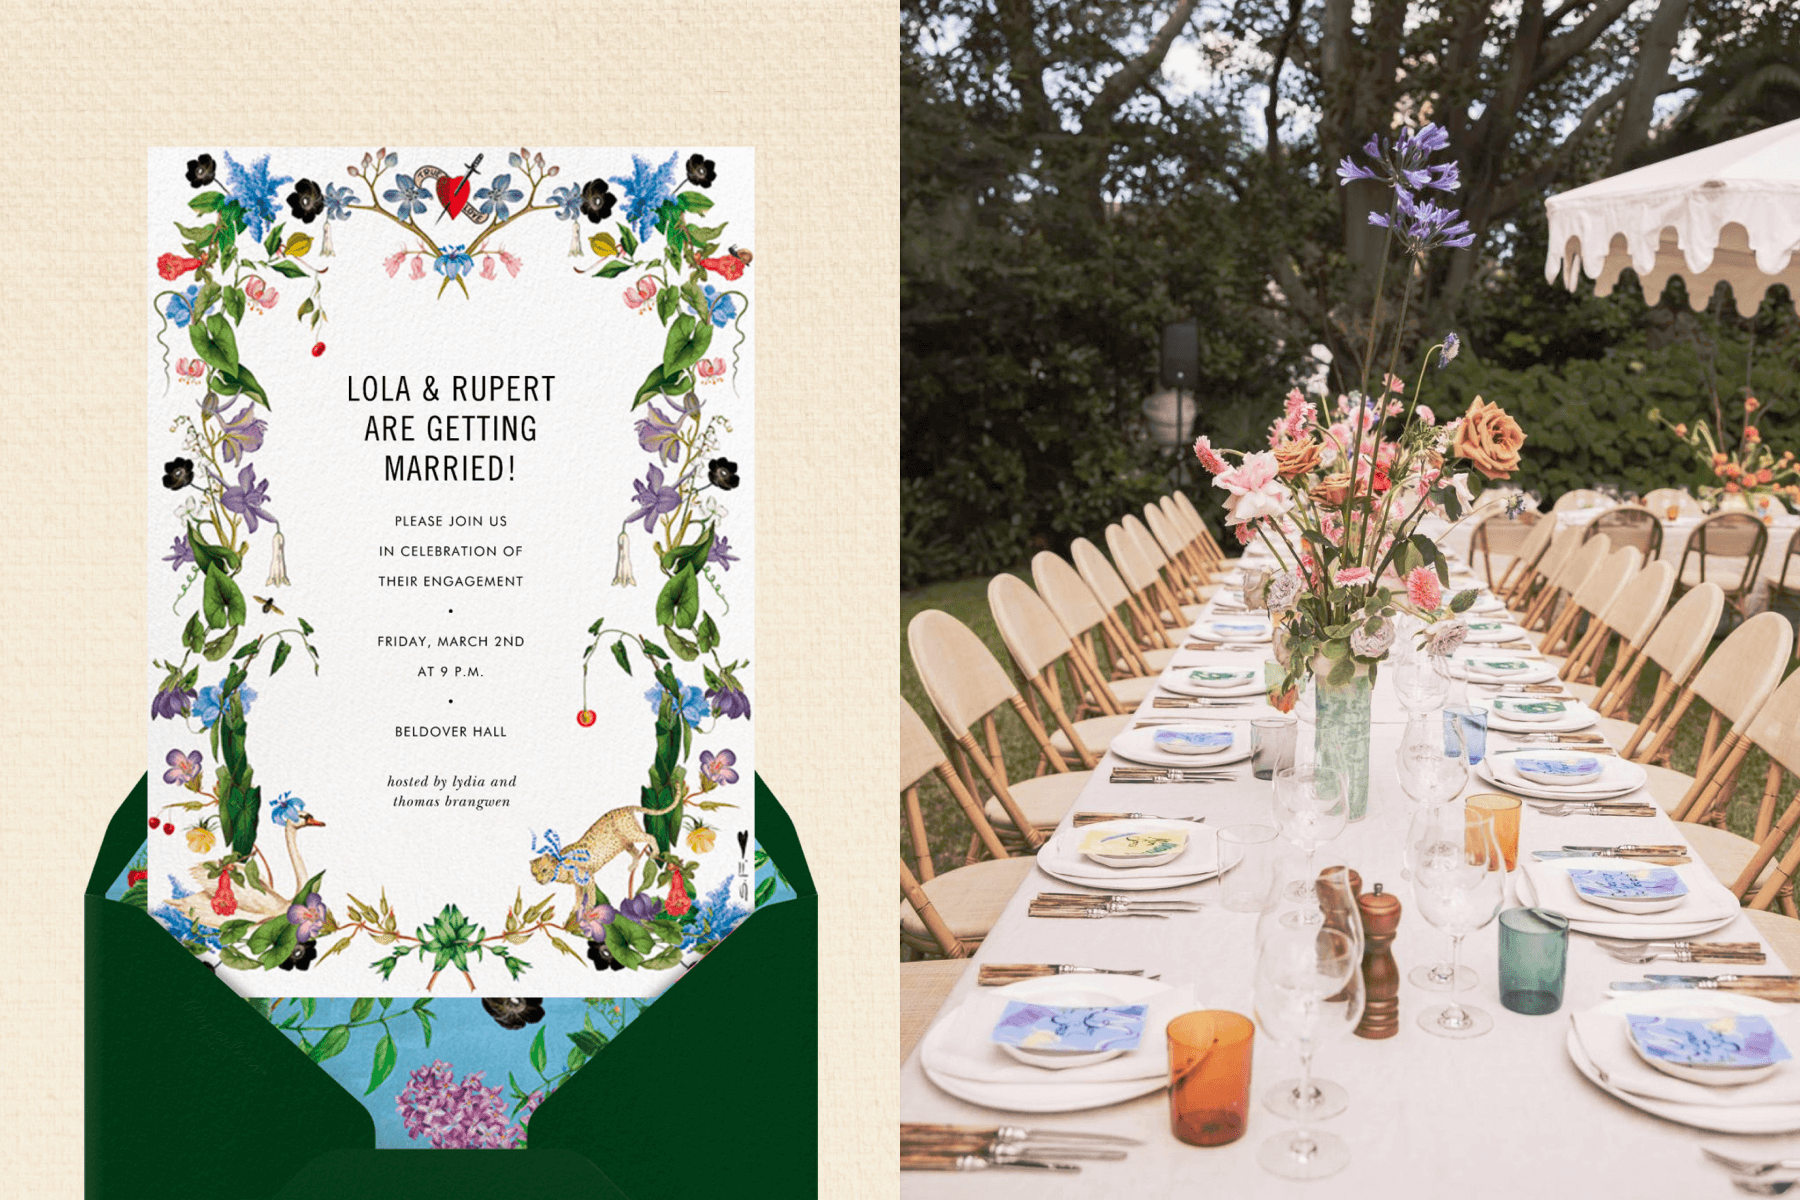 left: A white engagement party invitation with a whimsical border of tropical flowers and foliage, a swan, and cheetah with a bow on its neck. Right: A banquet table outdoors with a white table cloth has an arrangement of garden flowers and roses in the center.